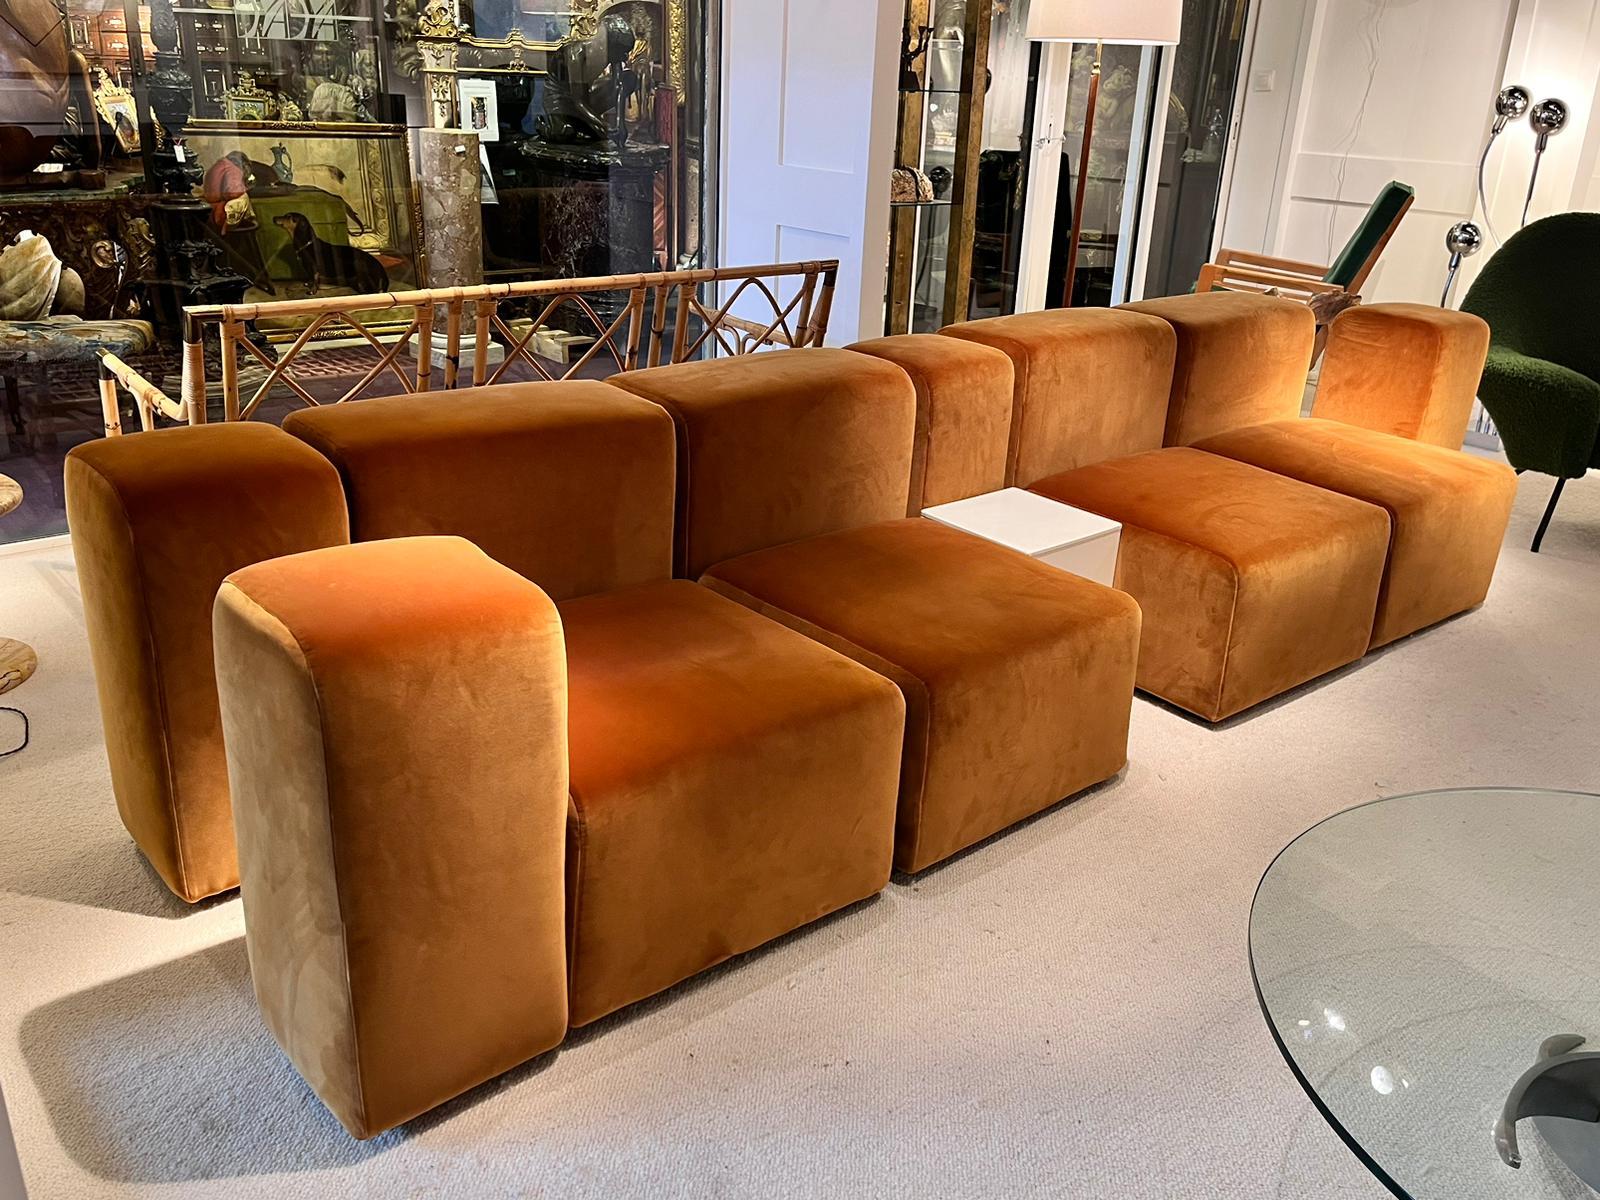 Modular 'Sistema 61' sofa by Giancarlo Piretti for Castelli Innovative system consisting of four seating elements, 5 back - armrests and three corner columns which can be linked together on the underside with metal clamps.
Due to this easy